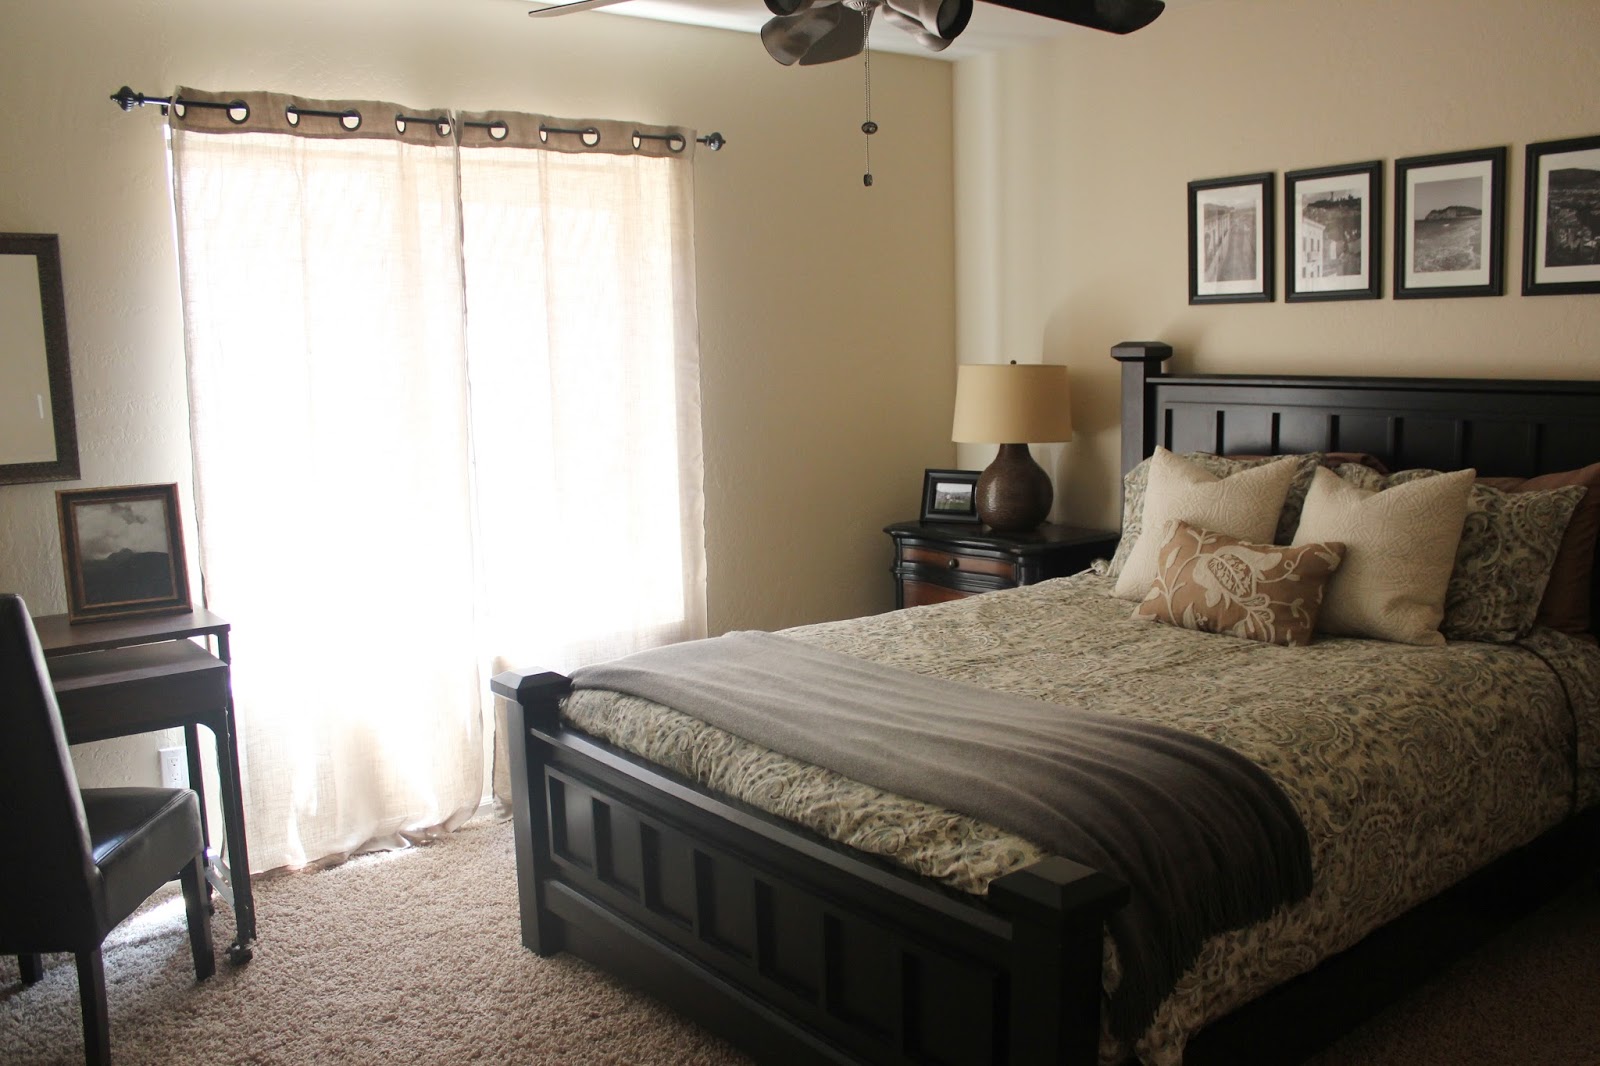 Designs from Home: Bedroom Redesign